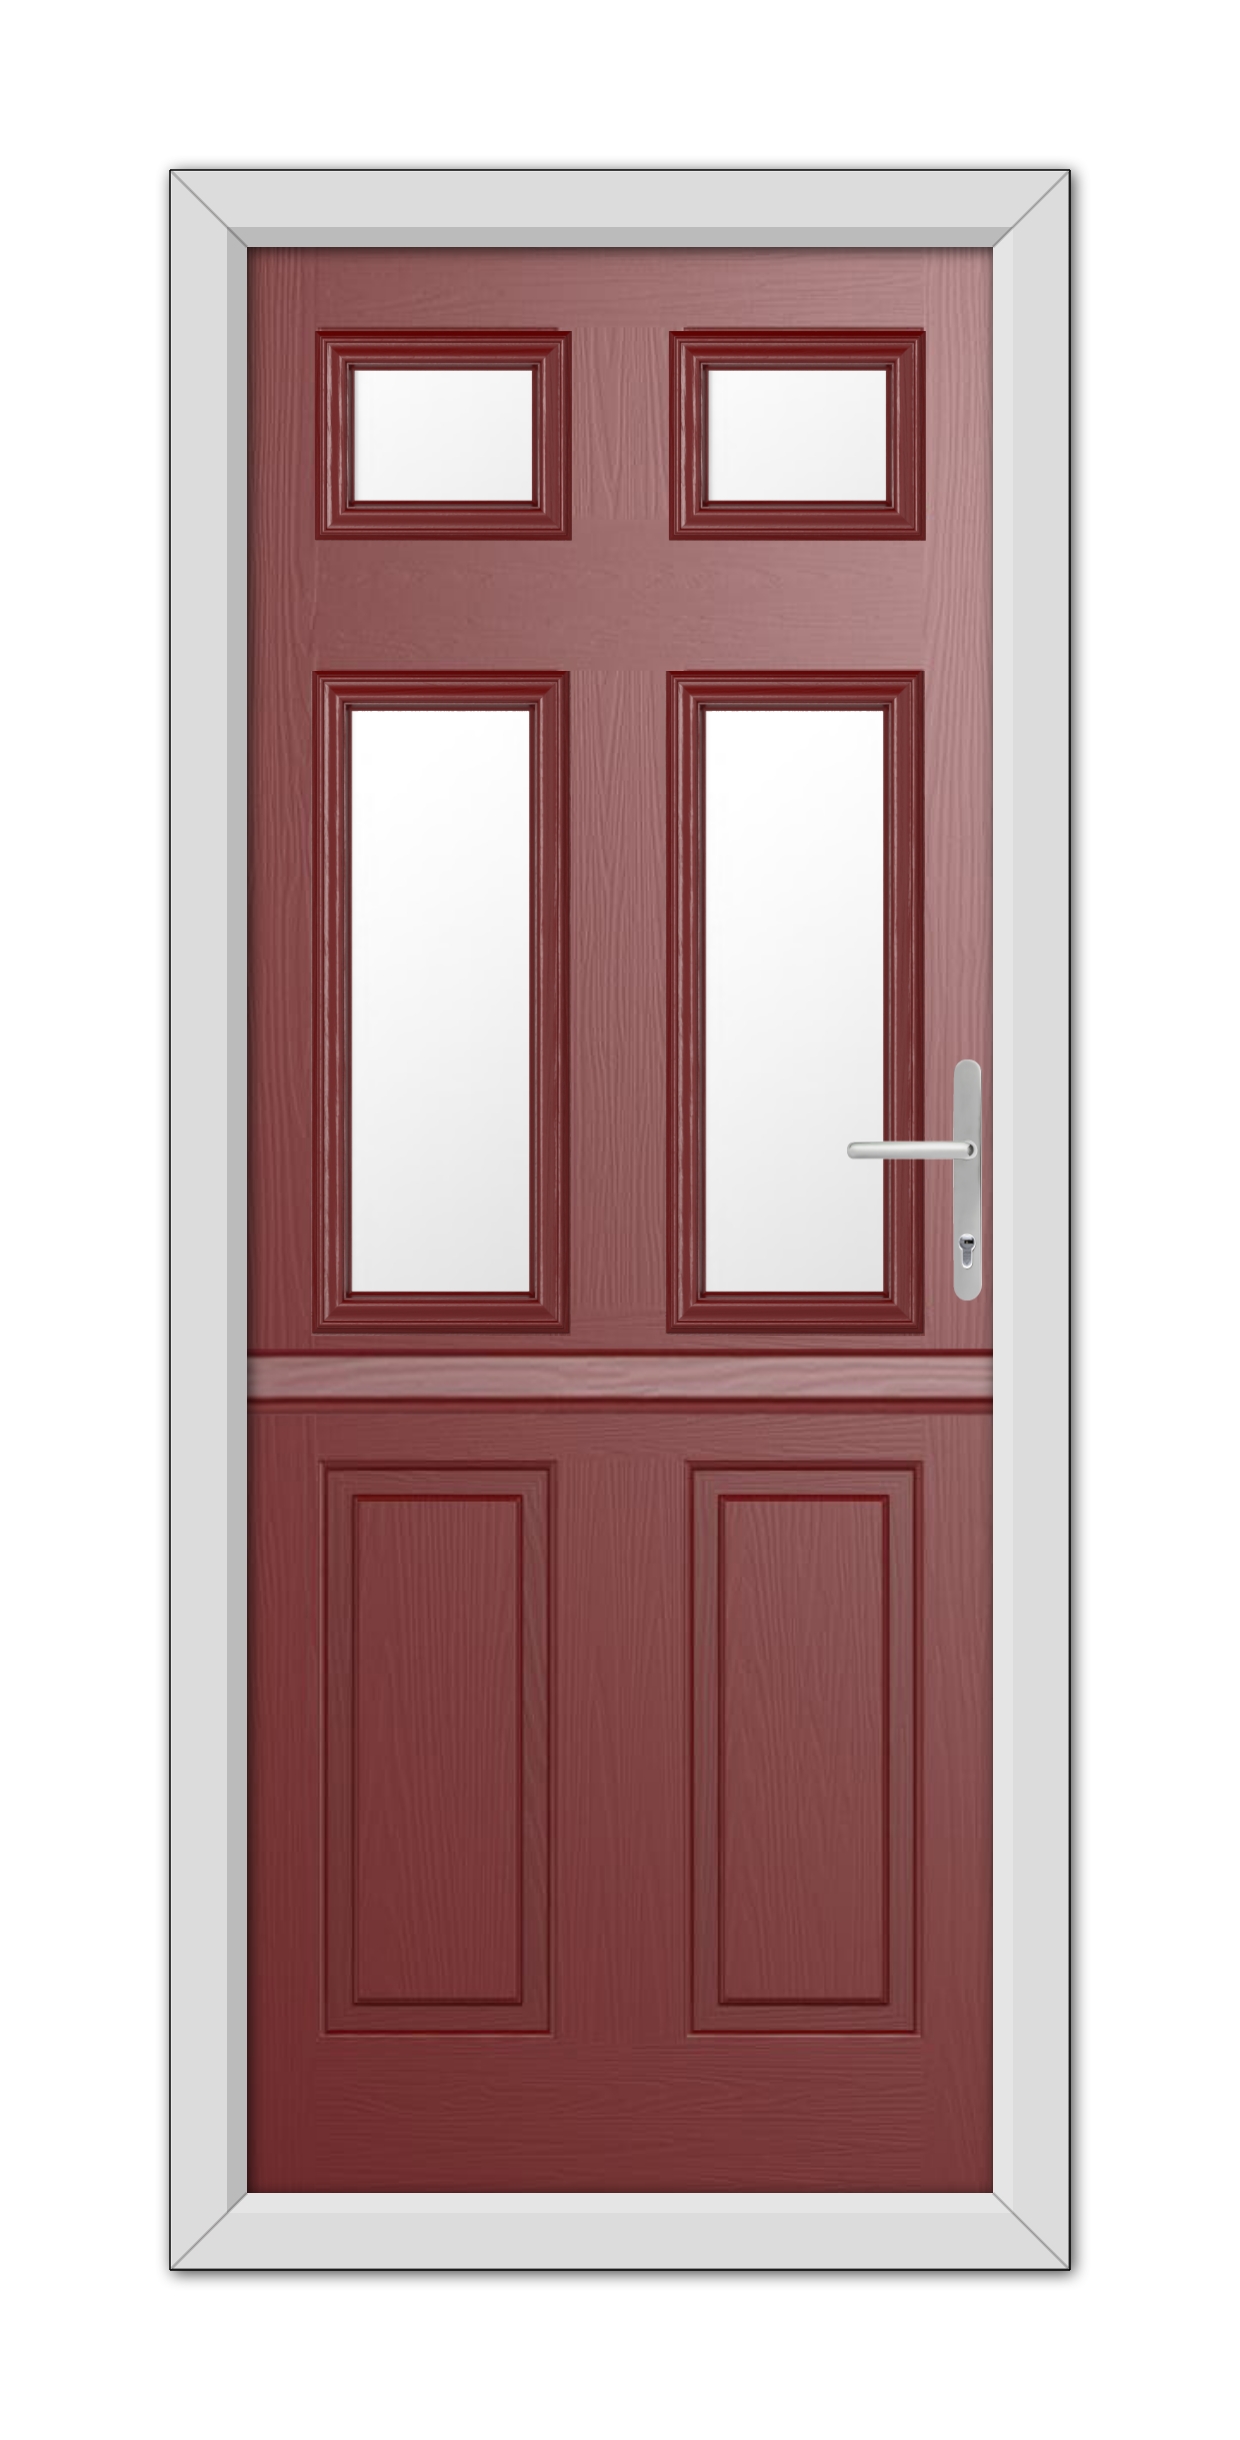 A modern Red Middleton Glazed 4 Stable Composite Door 48mm Timber Core with white trim, featuring top glass panels and a silver handle on the right.